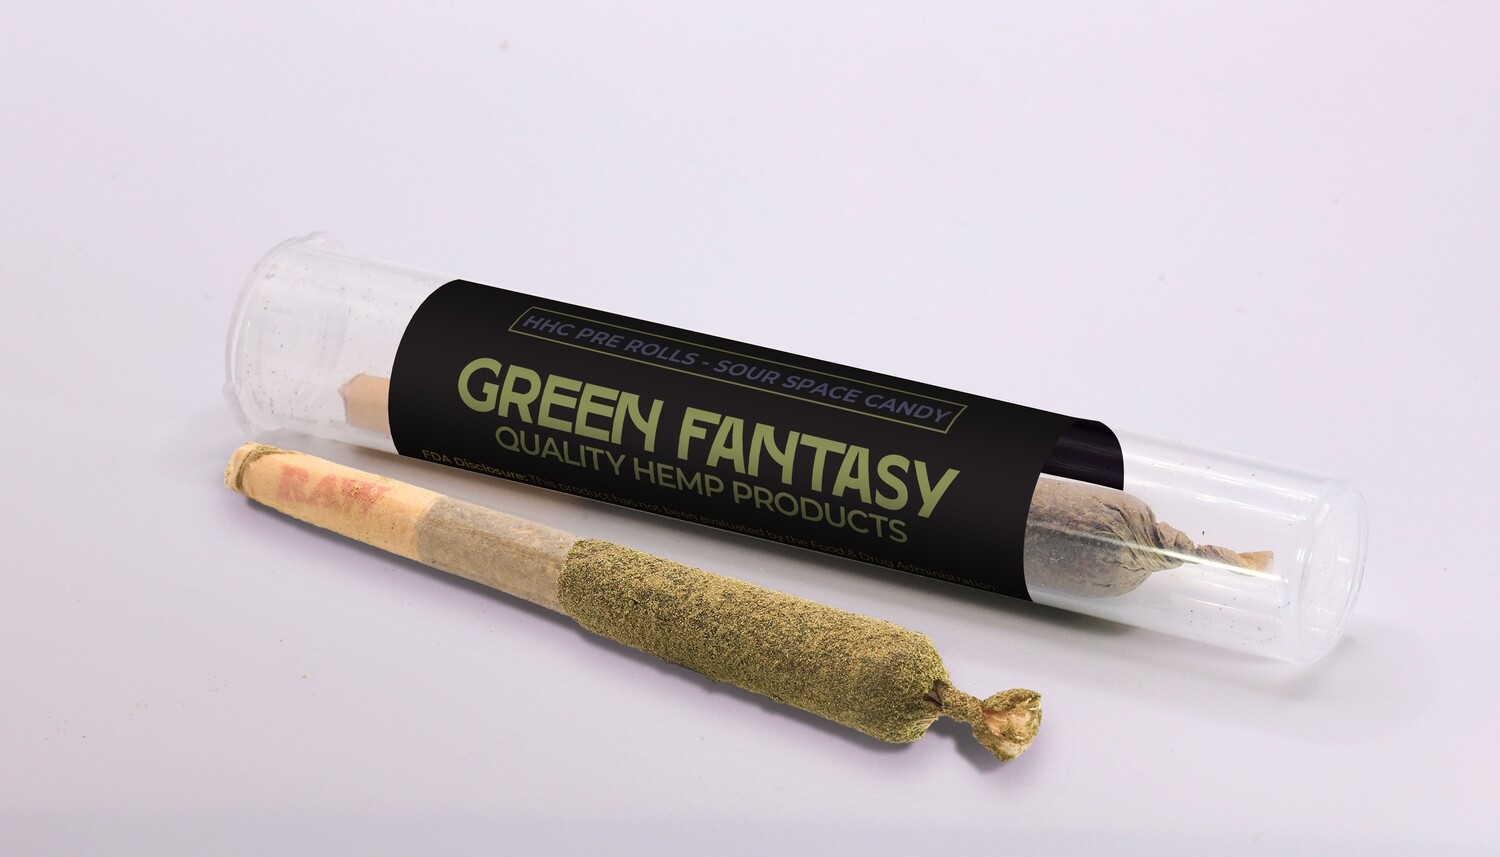 HHC Pre-Rolls Sour Space Candy
- From 2 PIECES